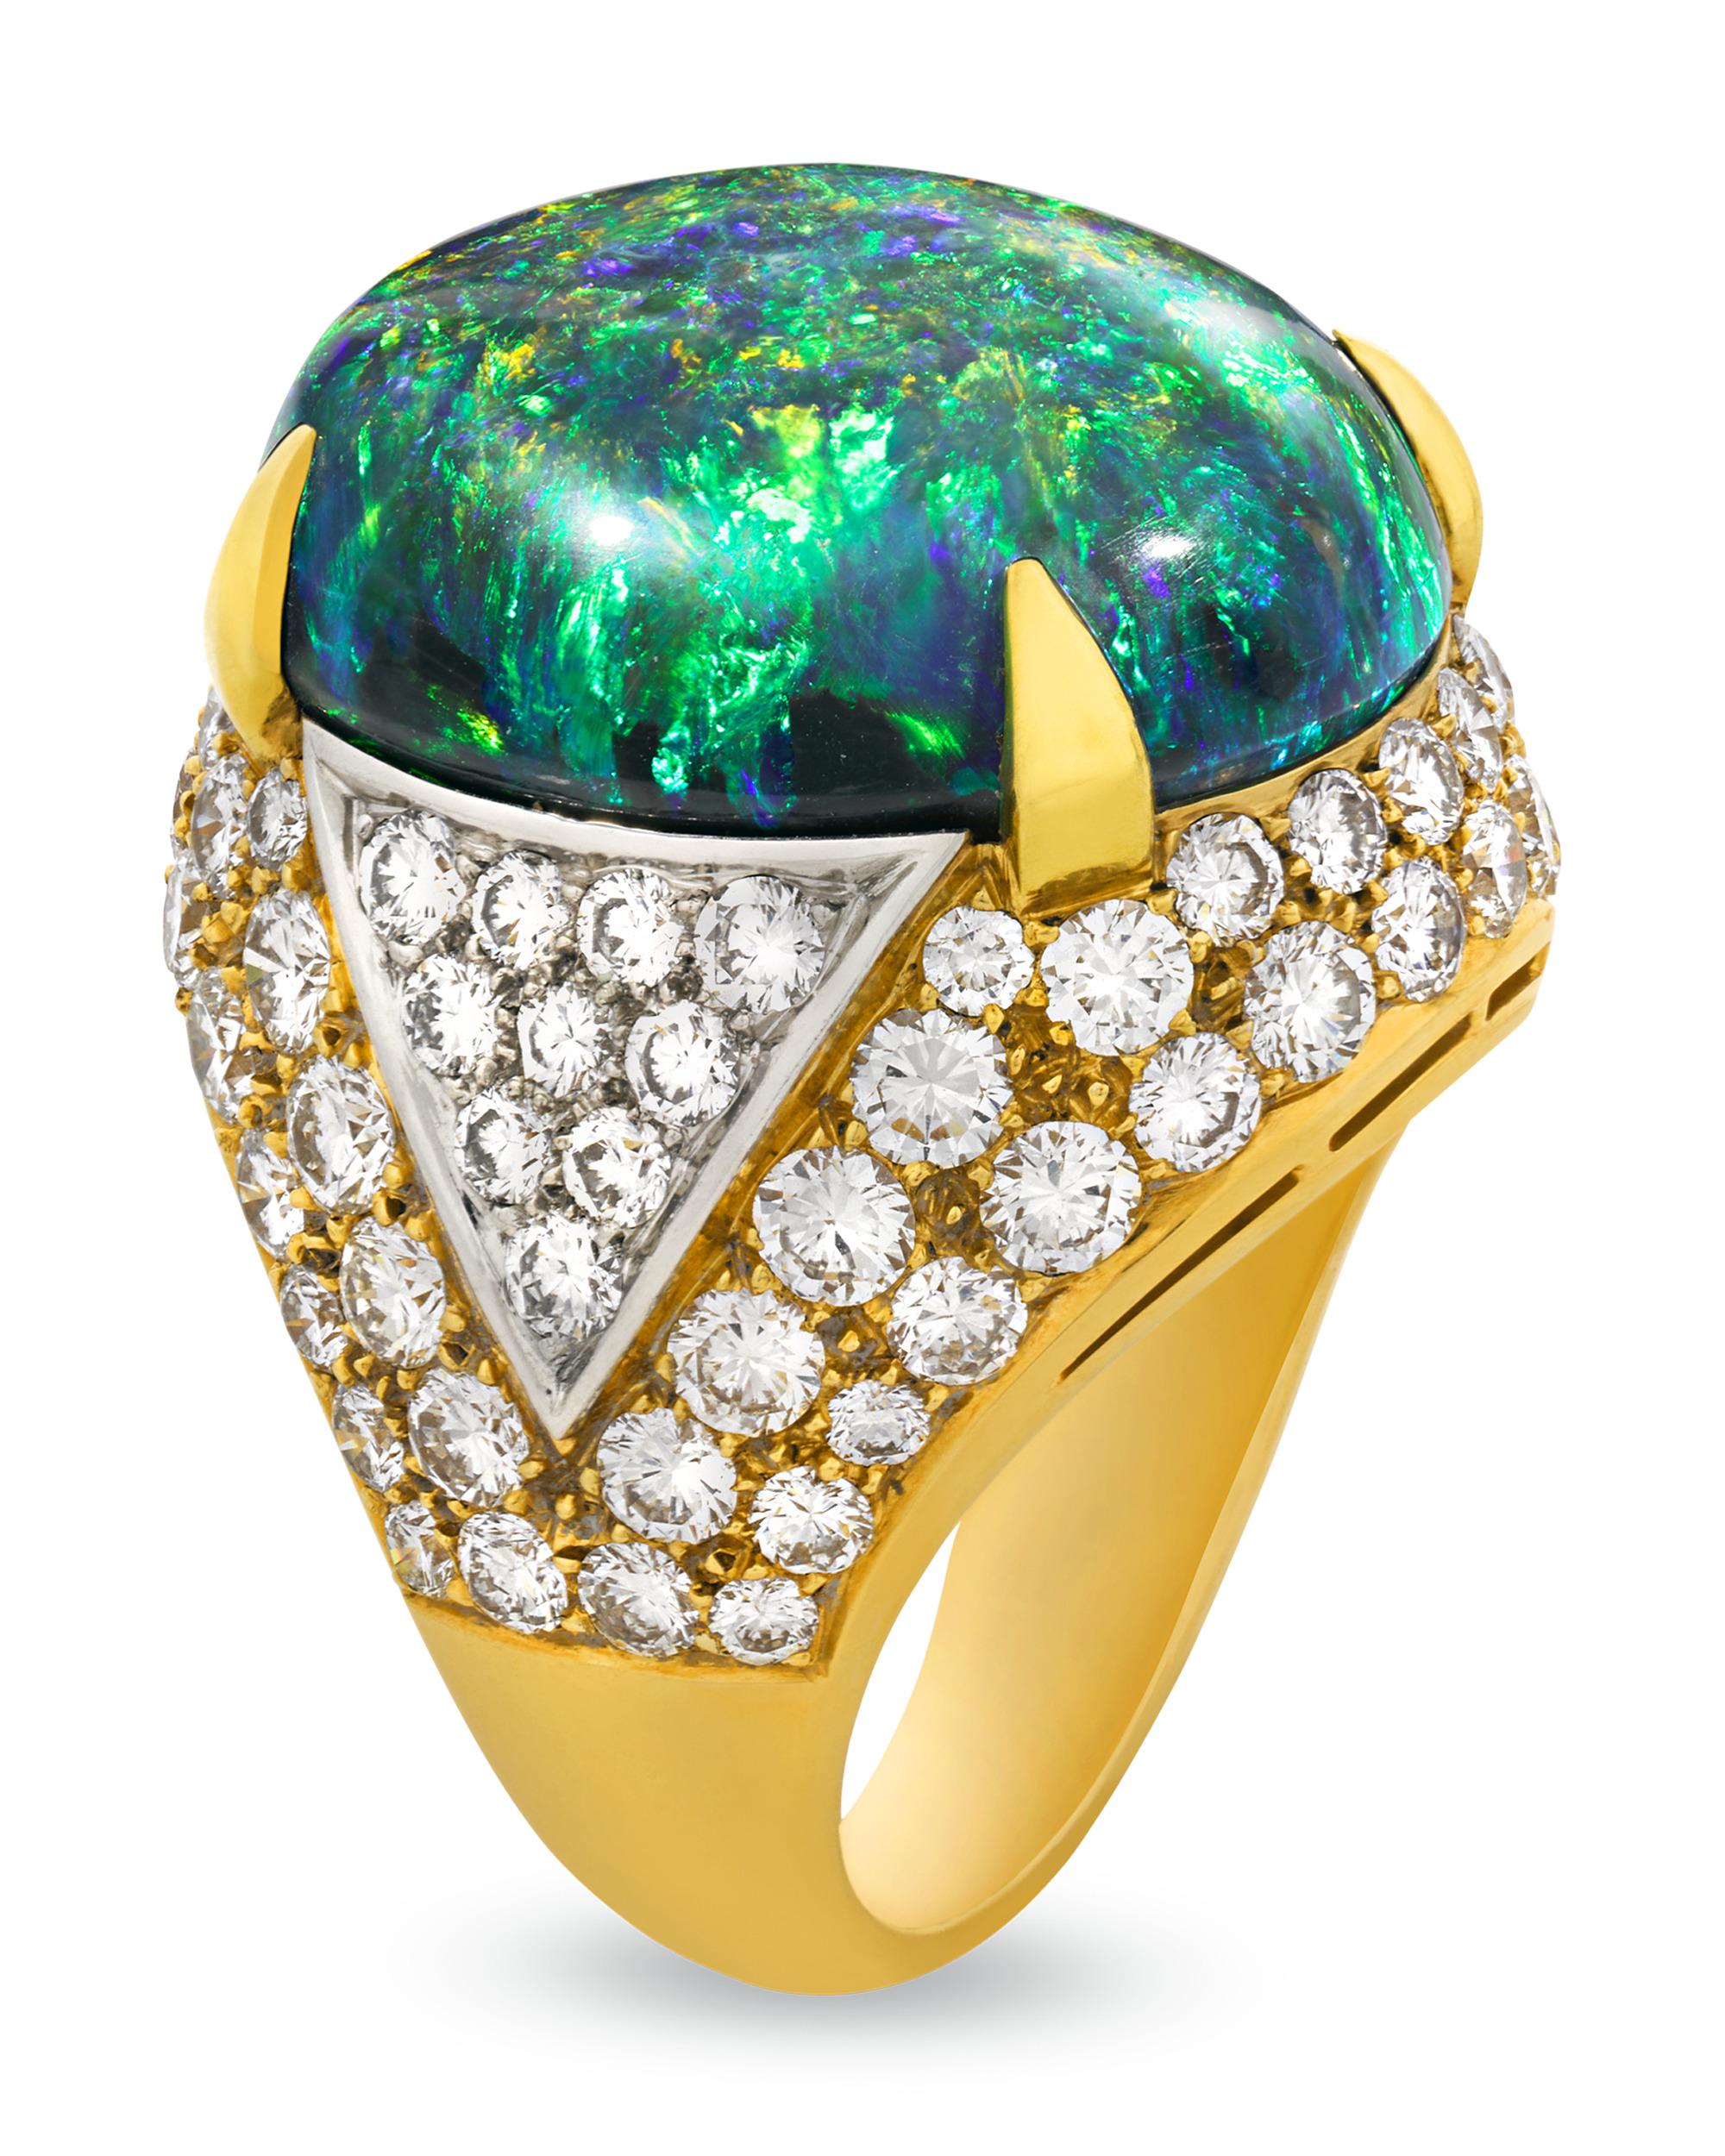 Dynamic beauty and exceptional color permeate the approximately 20.00-carat lightning ridge black opal in this sculptural ring from Bulgari. Displaying a kaleidoscopic range of cool green, red and blue hues, the opal is accented by glittering white